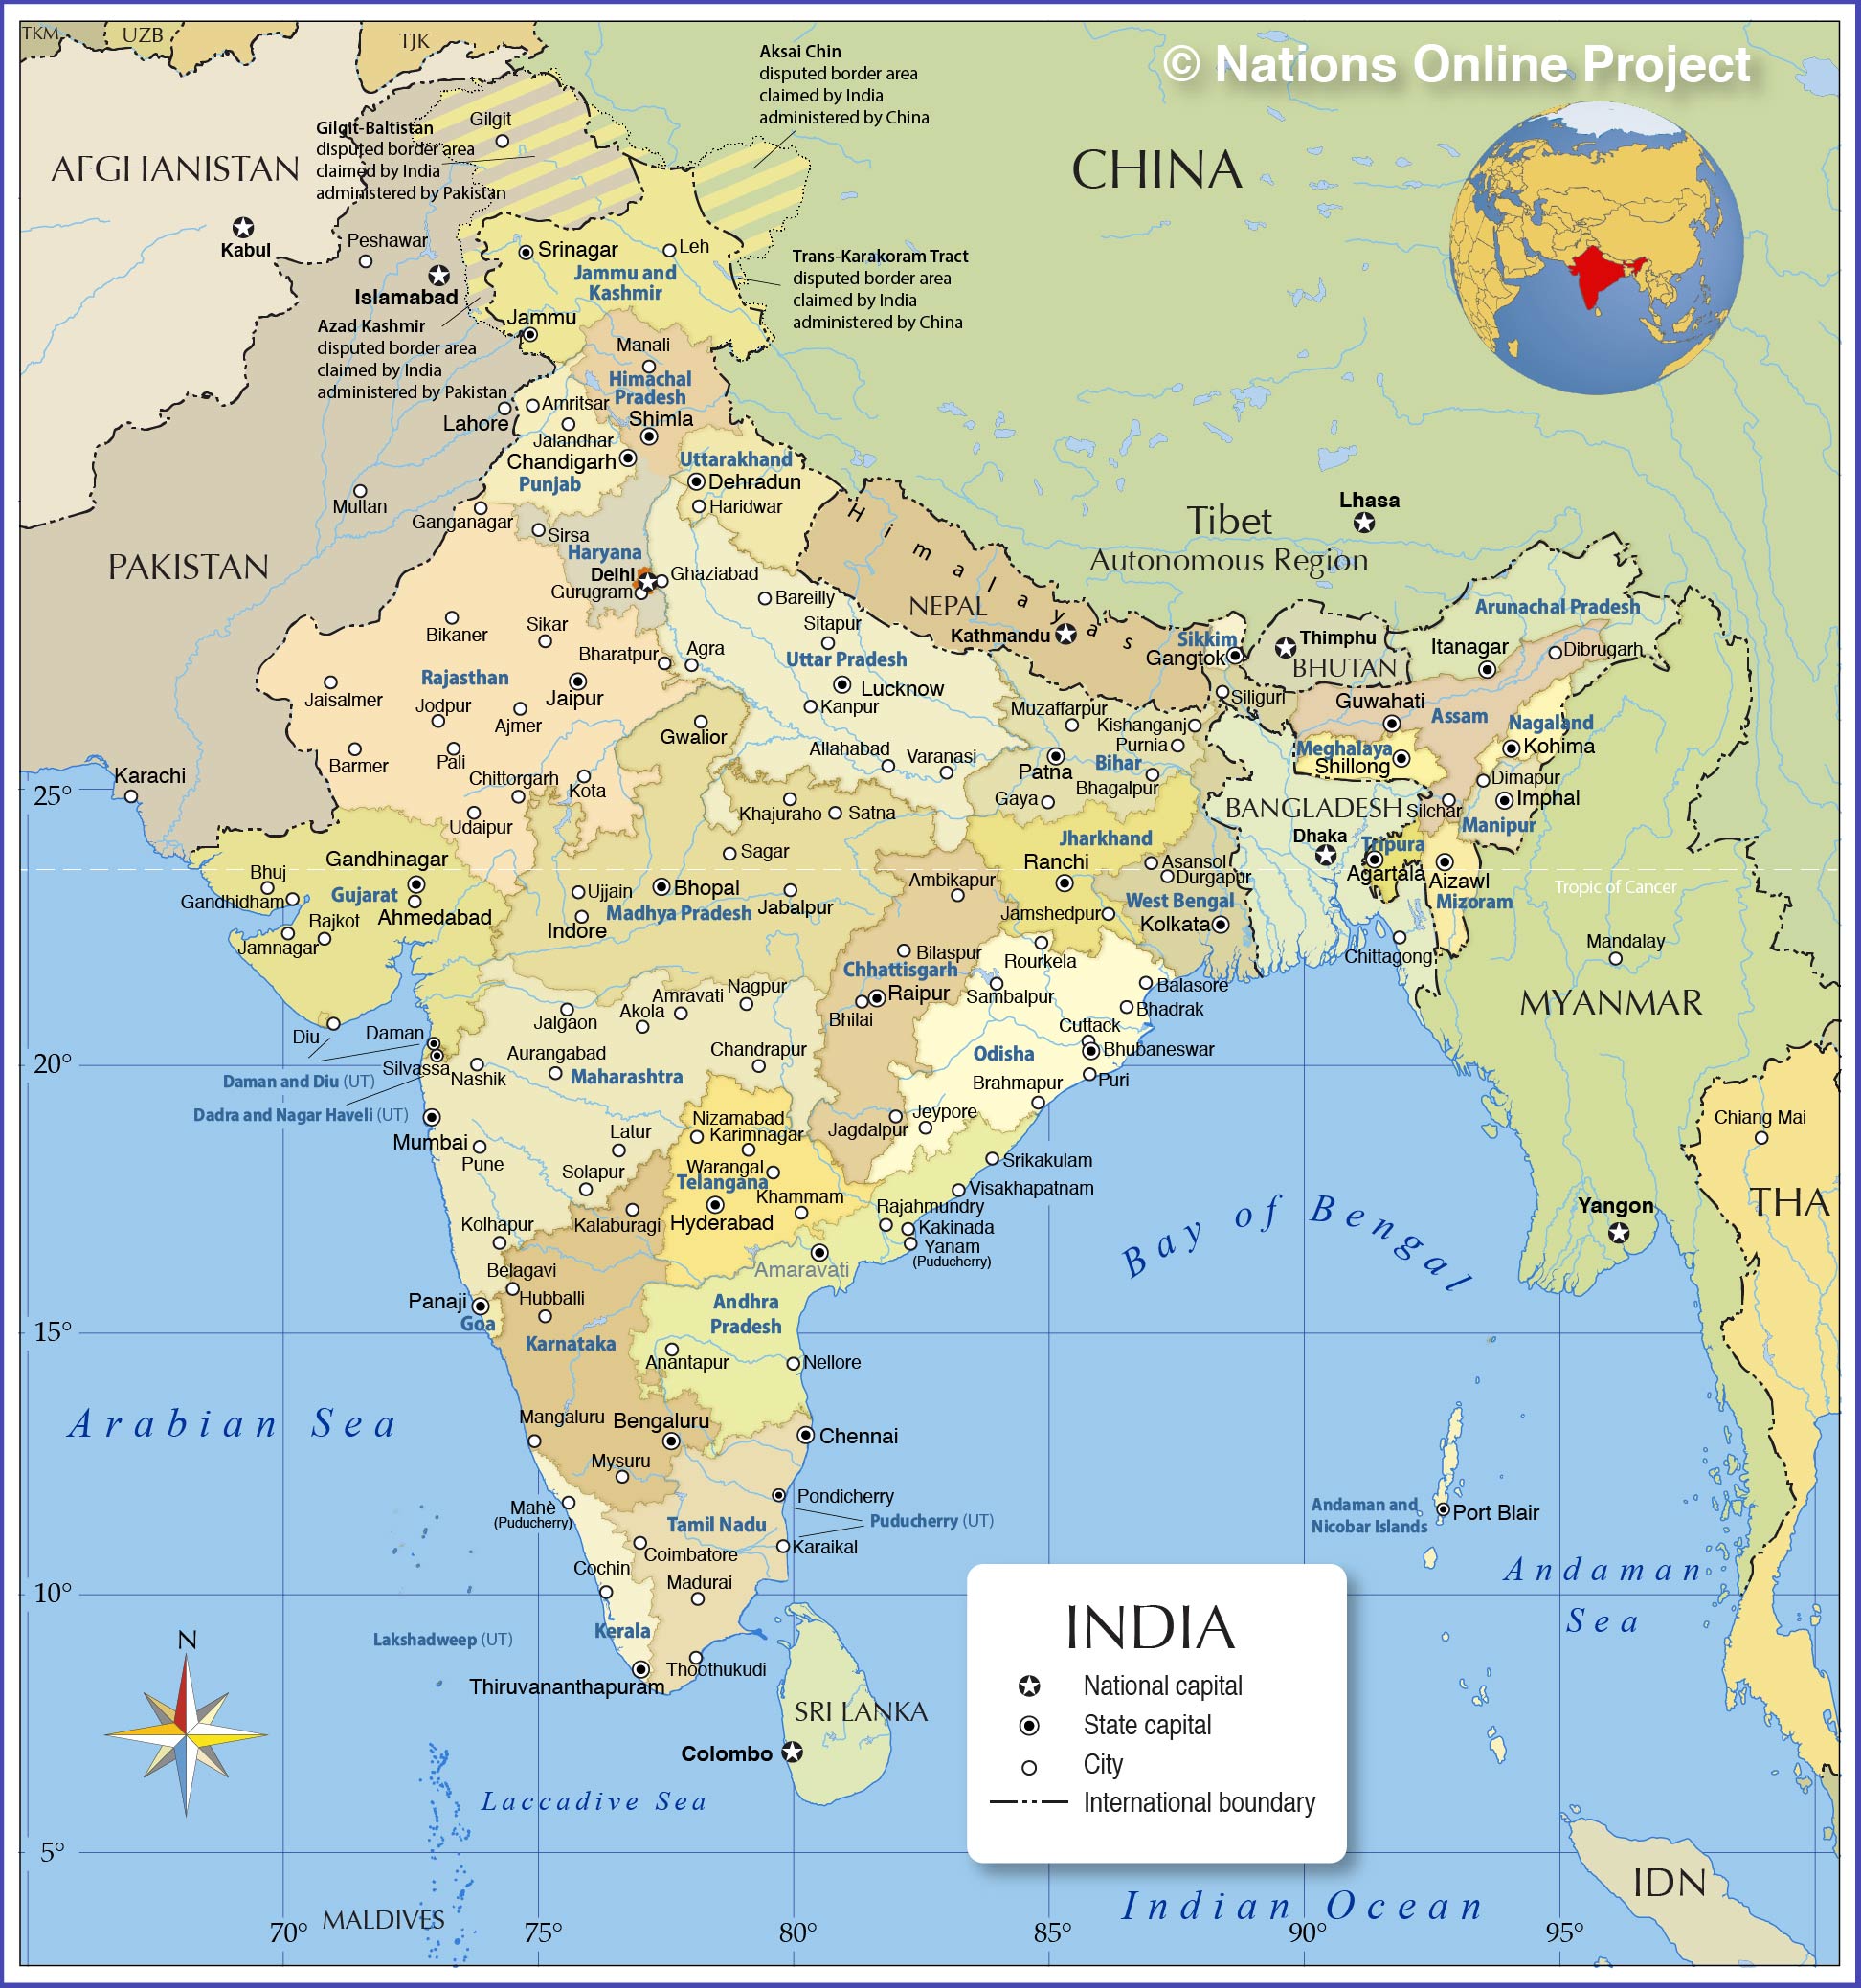 Indian knows how to draw map as well : r/China